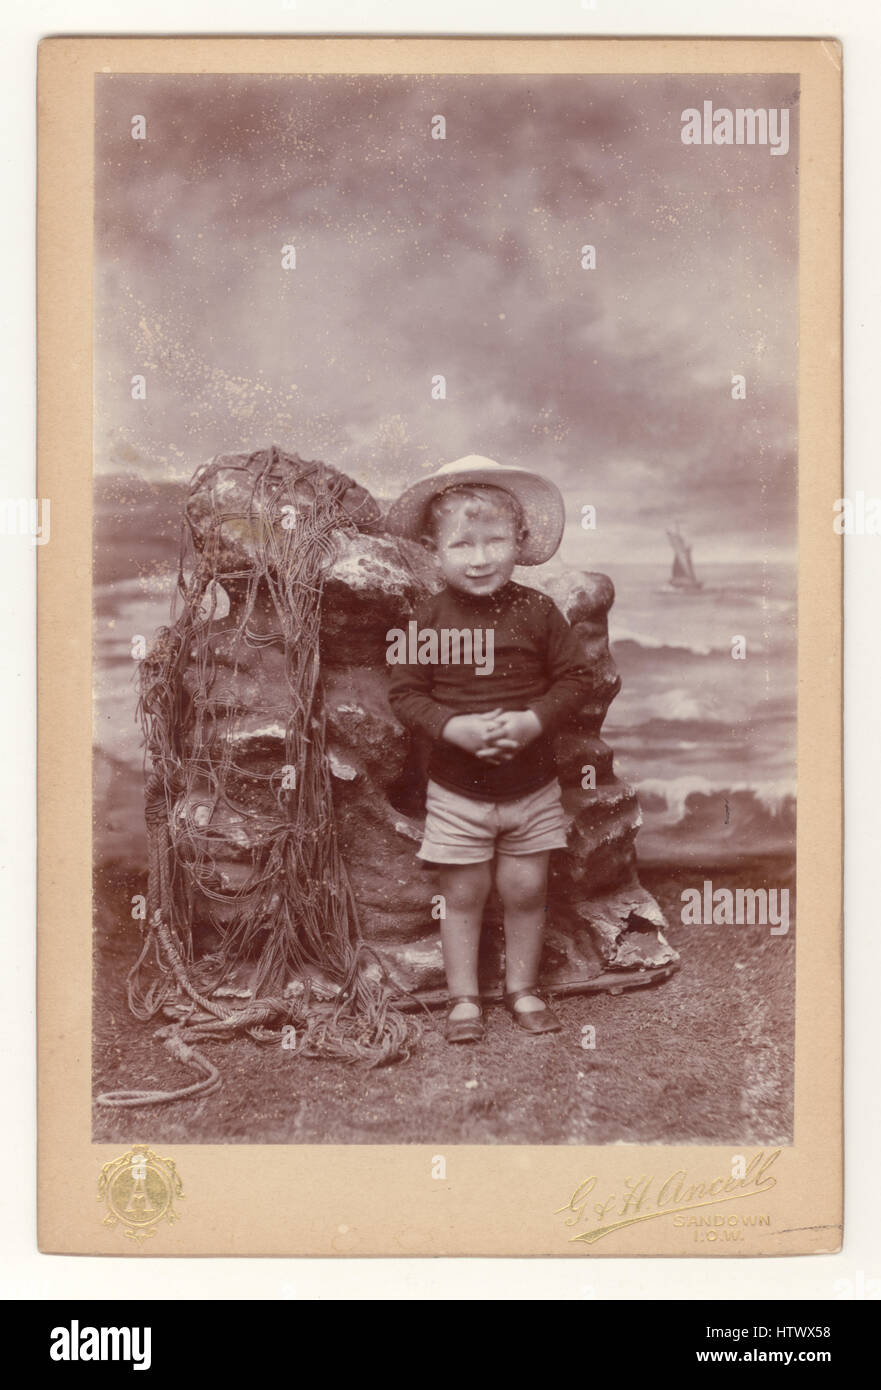 Original Edwardian cabinet card of a young child posing in a photographic studio with an elaborate seaside themed background / backdrop, Sandown, Isle of Wight, U.K. dated September 1909 Stock Photo